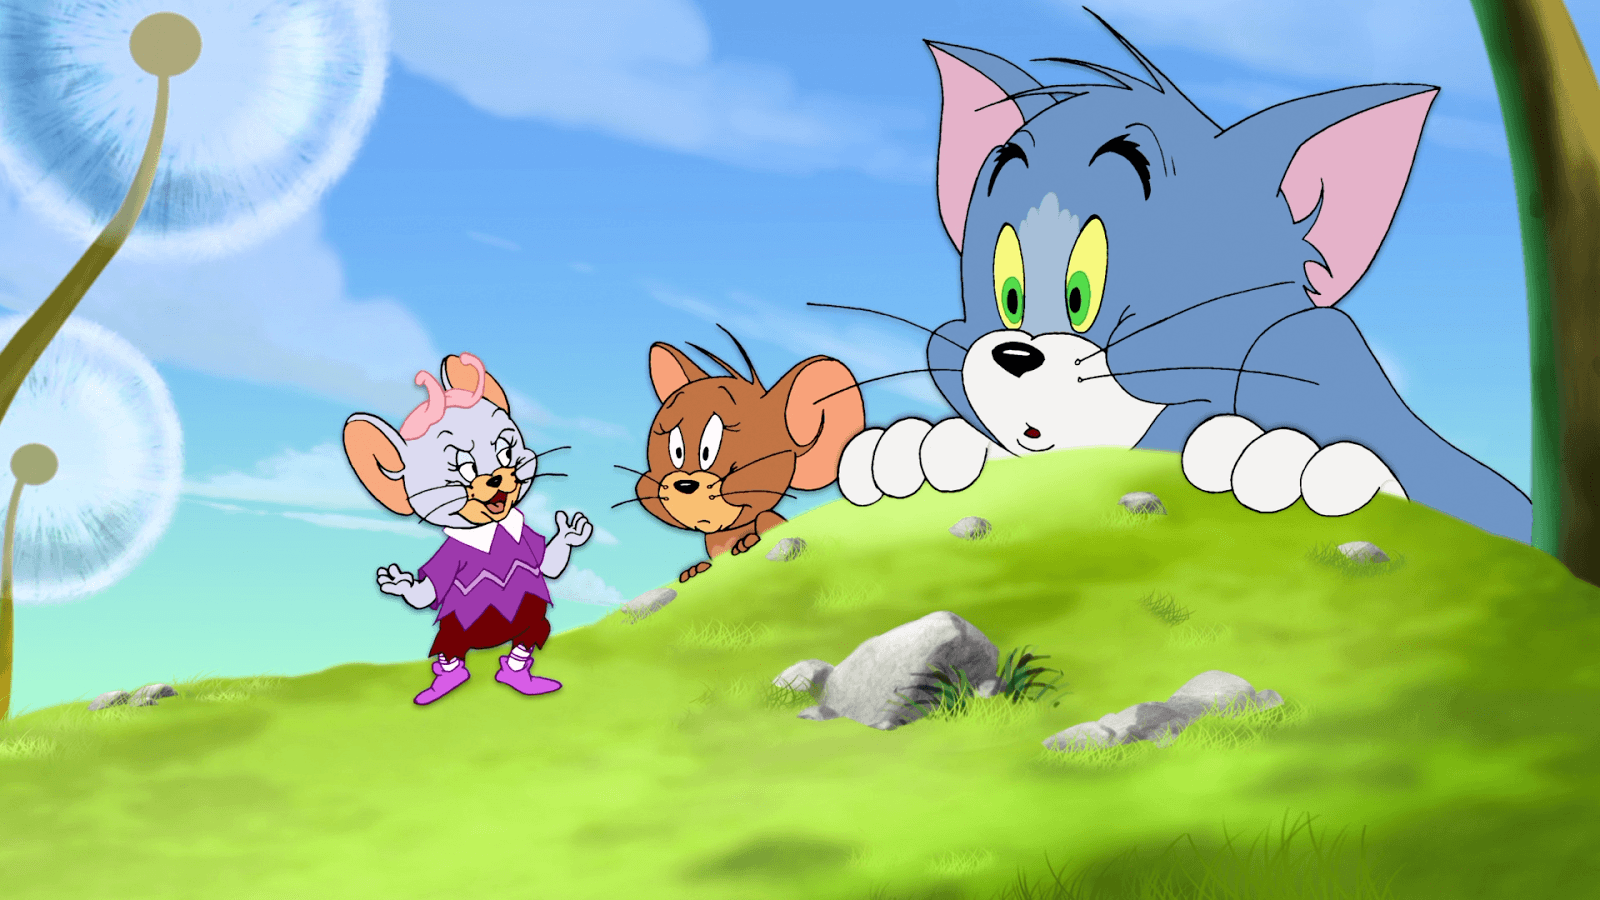 Tom and Jerry Wallpapers for PC